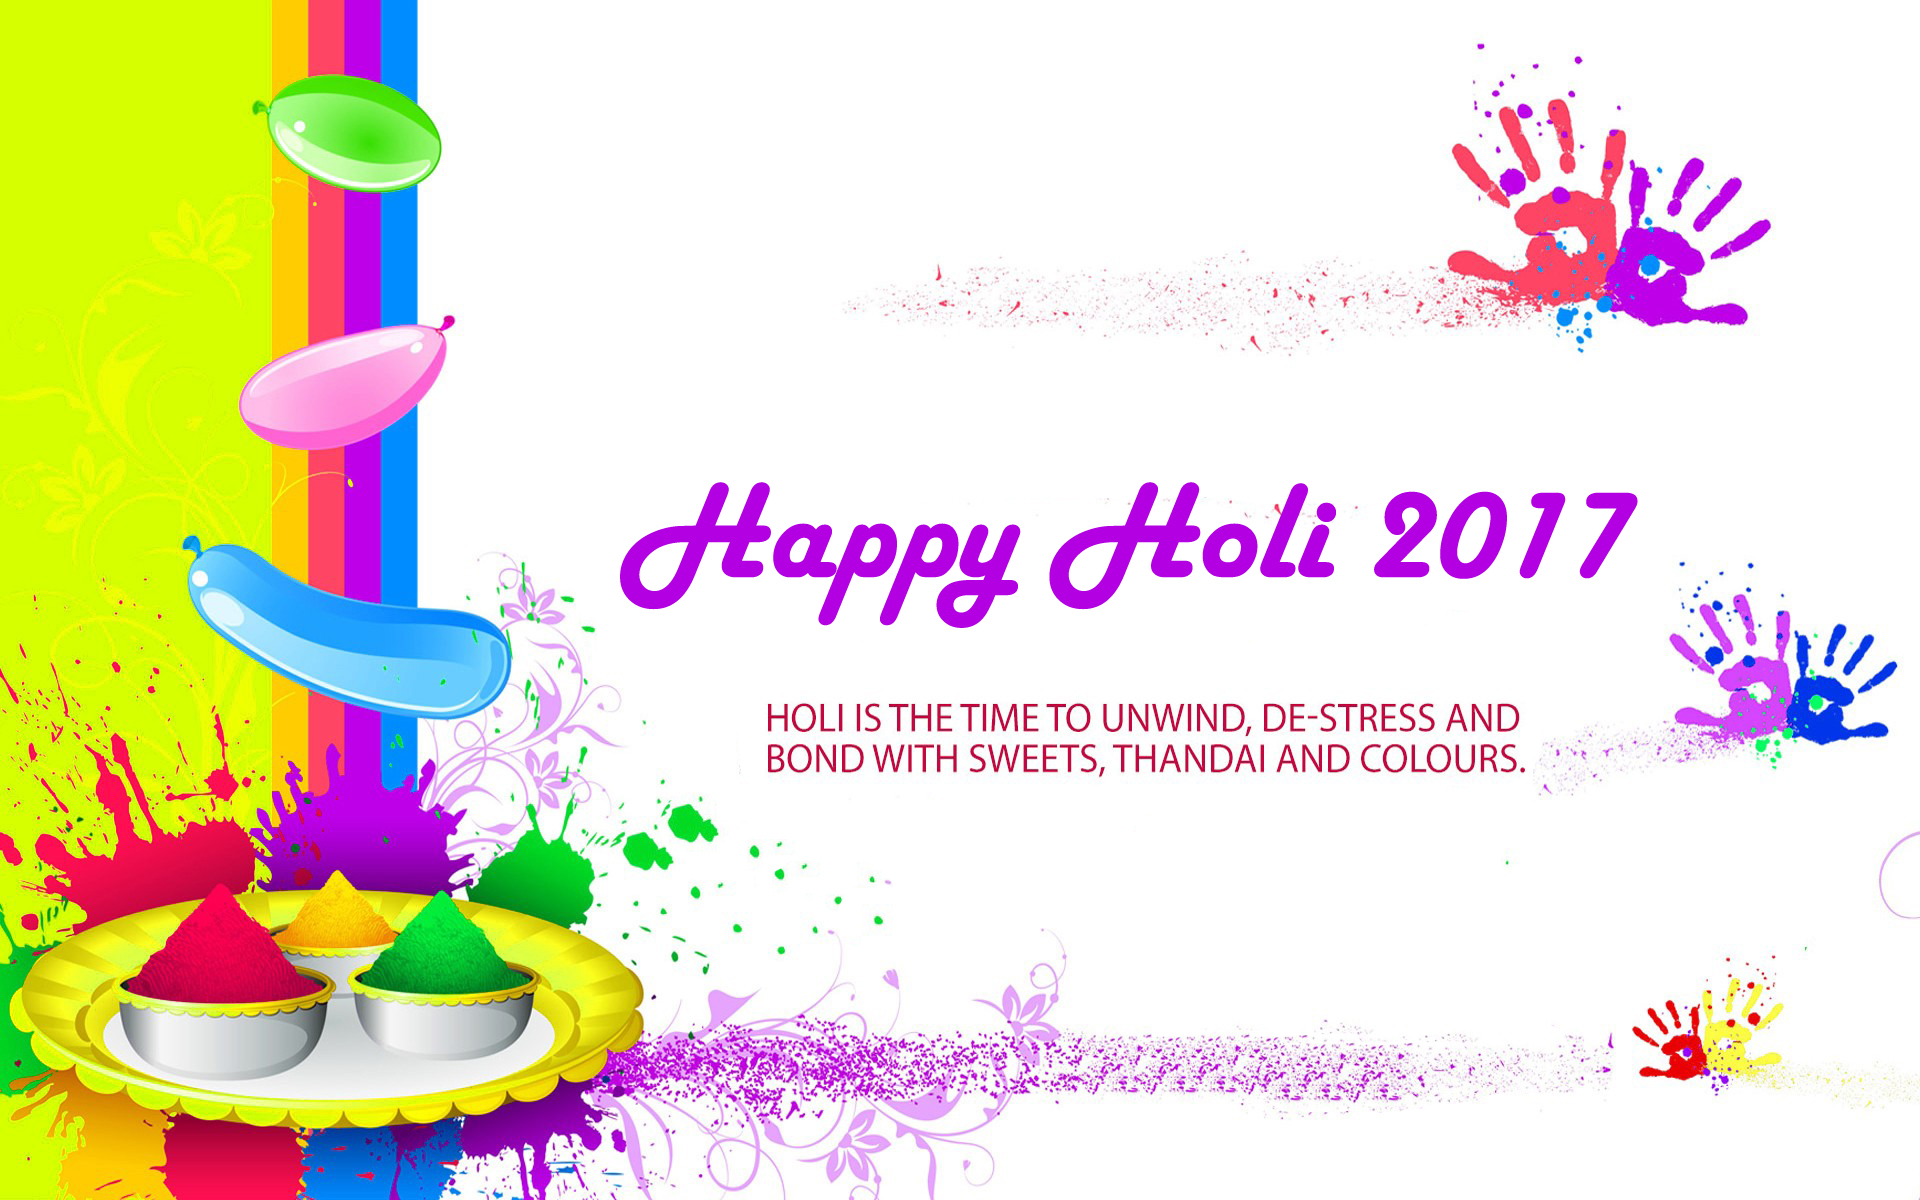 Free Download of Happy Holi 2017 Wallpaper in High Resolution HD